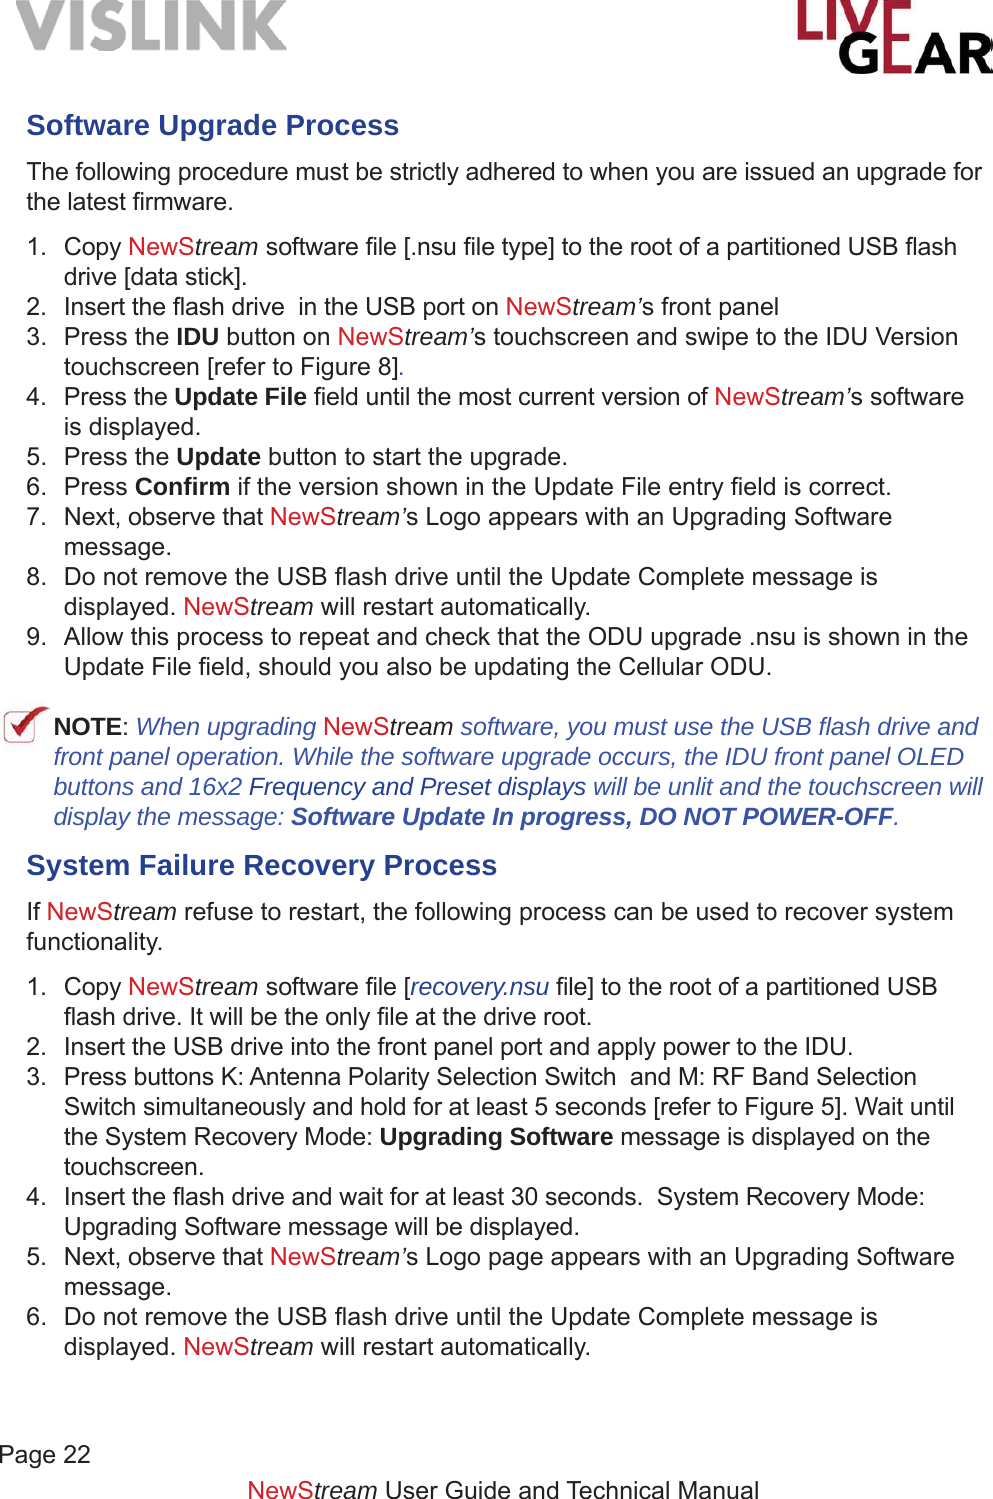 NewStream User Guide and Technical ManualSoftware Upgrade ProcessThe following procedure must be strictly adhered to when you are issued an upgrade for the latest ﬁ rmware.1. Copy NewStream software ﬁ le [.nsu ﬁ le type] to the root of a partitioned USB ﬂ ash drive [data stick]. 2. Insert the ﬂ ash drive  in the USB port on NewStream’s front panel 3. Press the IDU button on NewStream’s touchscreen and swipe to the IDU Version touchscreen [refer to Figure 8].4. Press the Update File ﬁ eld until the most current version of NewStream’s software is displayed.5. Press the Update button to start the upgrade.6. Press Conﬁ rm if the version shown in the Update File entry ﬁ eld is correct.7.  Next, observe that NewStream’s Logo appears with an Upgrading Software message.8.  Do not remove the USB ﬂ ash drive until the Update Complete message is displayed. NewStream will restart automatically.9.  Allow this process to repeat and check that the ODU upgrade .nsu is shown in the Update File ﬁ eld, should you also be updating the Cellular ODU. NOTE: When upgrading NewStream software, you must use the USB ﬂ ash drive and front panel operation. While the software upgrade occurs, the IDU front panel OLED buttons and 16x2 Frequency and Preset displays will be unlit and the touchscreen will display the message: Software Update In progress, DO NOT POWER-OFF.System Failure Recovery ProcessIf NewStream refuse to restart, the following process can be used to recover system functionality.1. Copy NewStream software ﬁ le [recovery.nsu ﬁ le] to the root of a partitioned USB ﬂ ash drive. It will be the only ﬁ le at the drive root.2.  Insert the USB drive into the front panel port and apply power to the IDU. 3.  Press buttons K: Antenna Polarity Selection Switch  and M: RF Band Selection Switch simultaneously and hold for at least 5 seconds [refer to Figure 5]. Wait until the System Recovery Mode: Upgrading Software message is displayed on the touchscreen.4. Insert the ﬂ ash drive and wait for at least 30 seconds.  System Recovery Mode: Upgrading Software message will be displayed.5.  Next, observe that NewStream’s Logo page appears with an Upgrading Software message.6.  Do not remove the USB ﬂ ash drive until the Update Complete message is displayed. NewStream will restart automatically.Page 22   